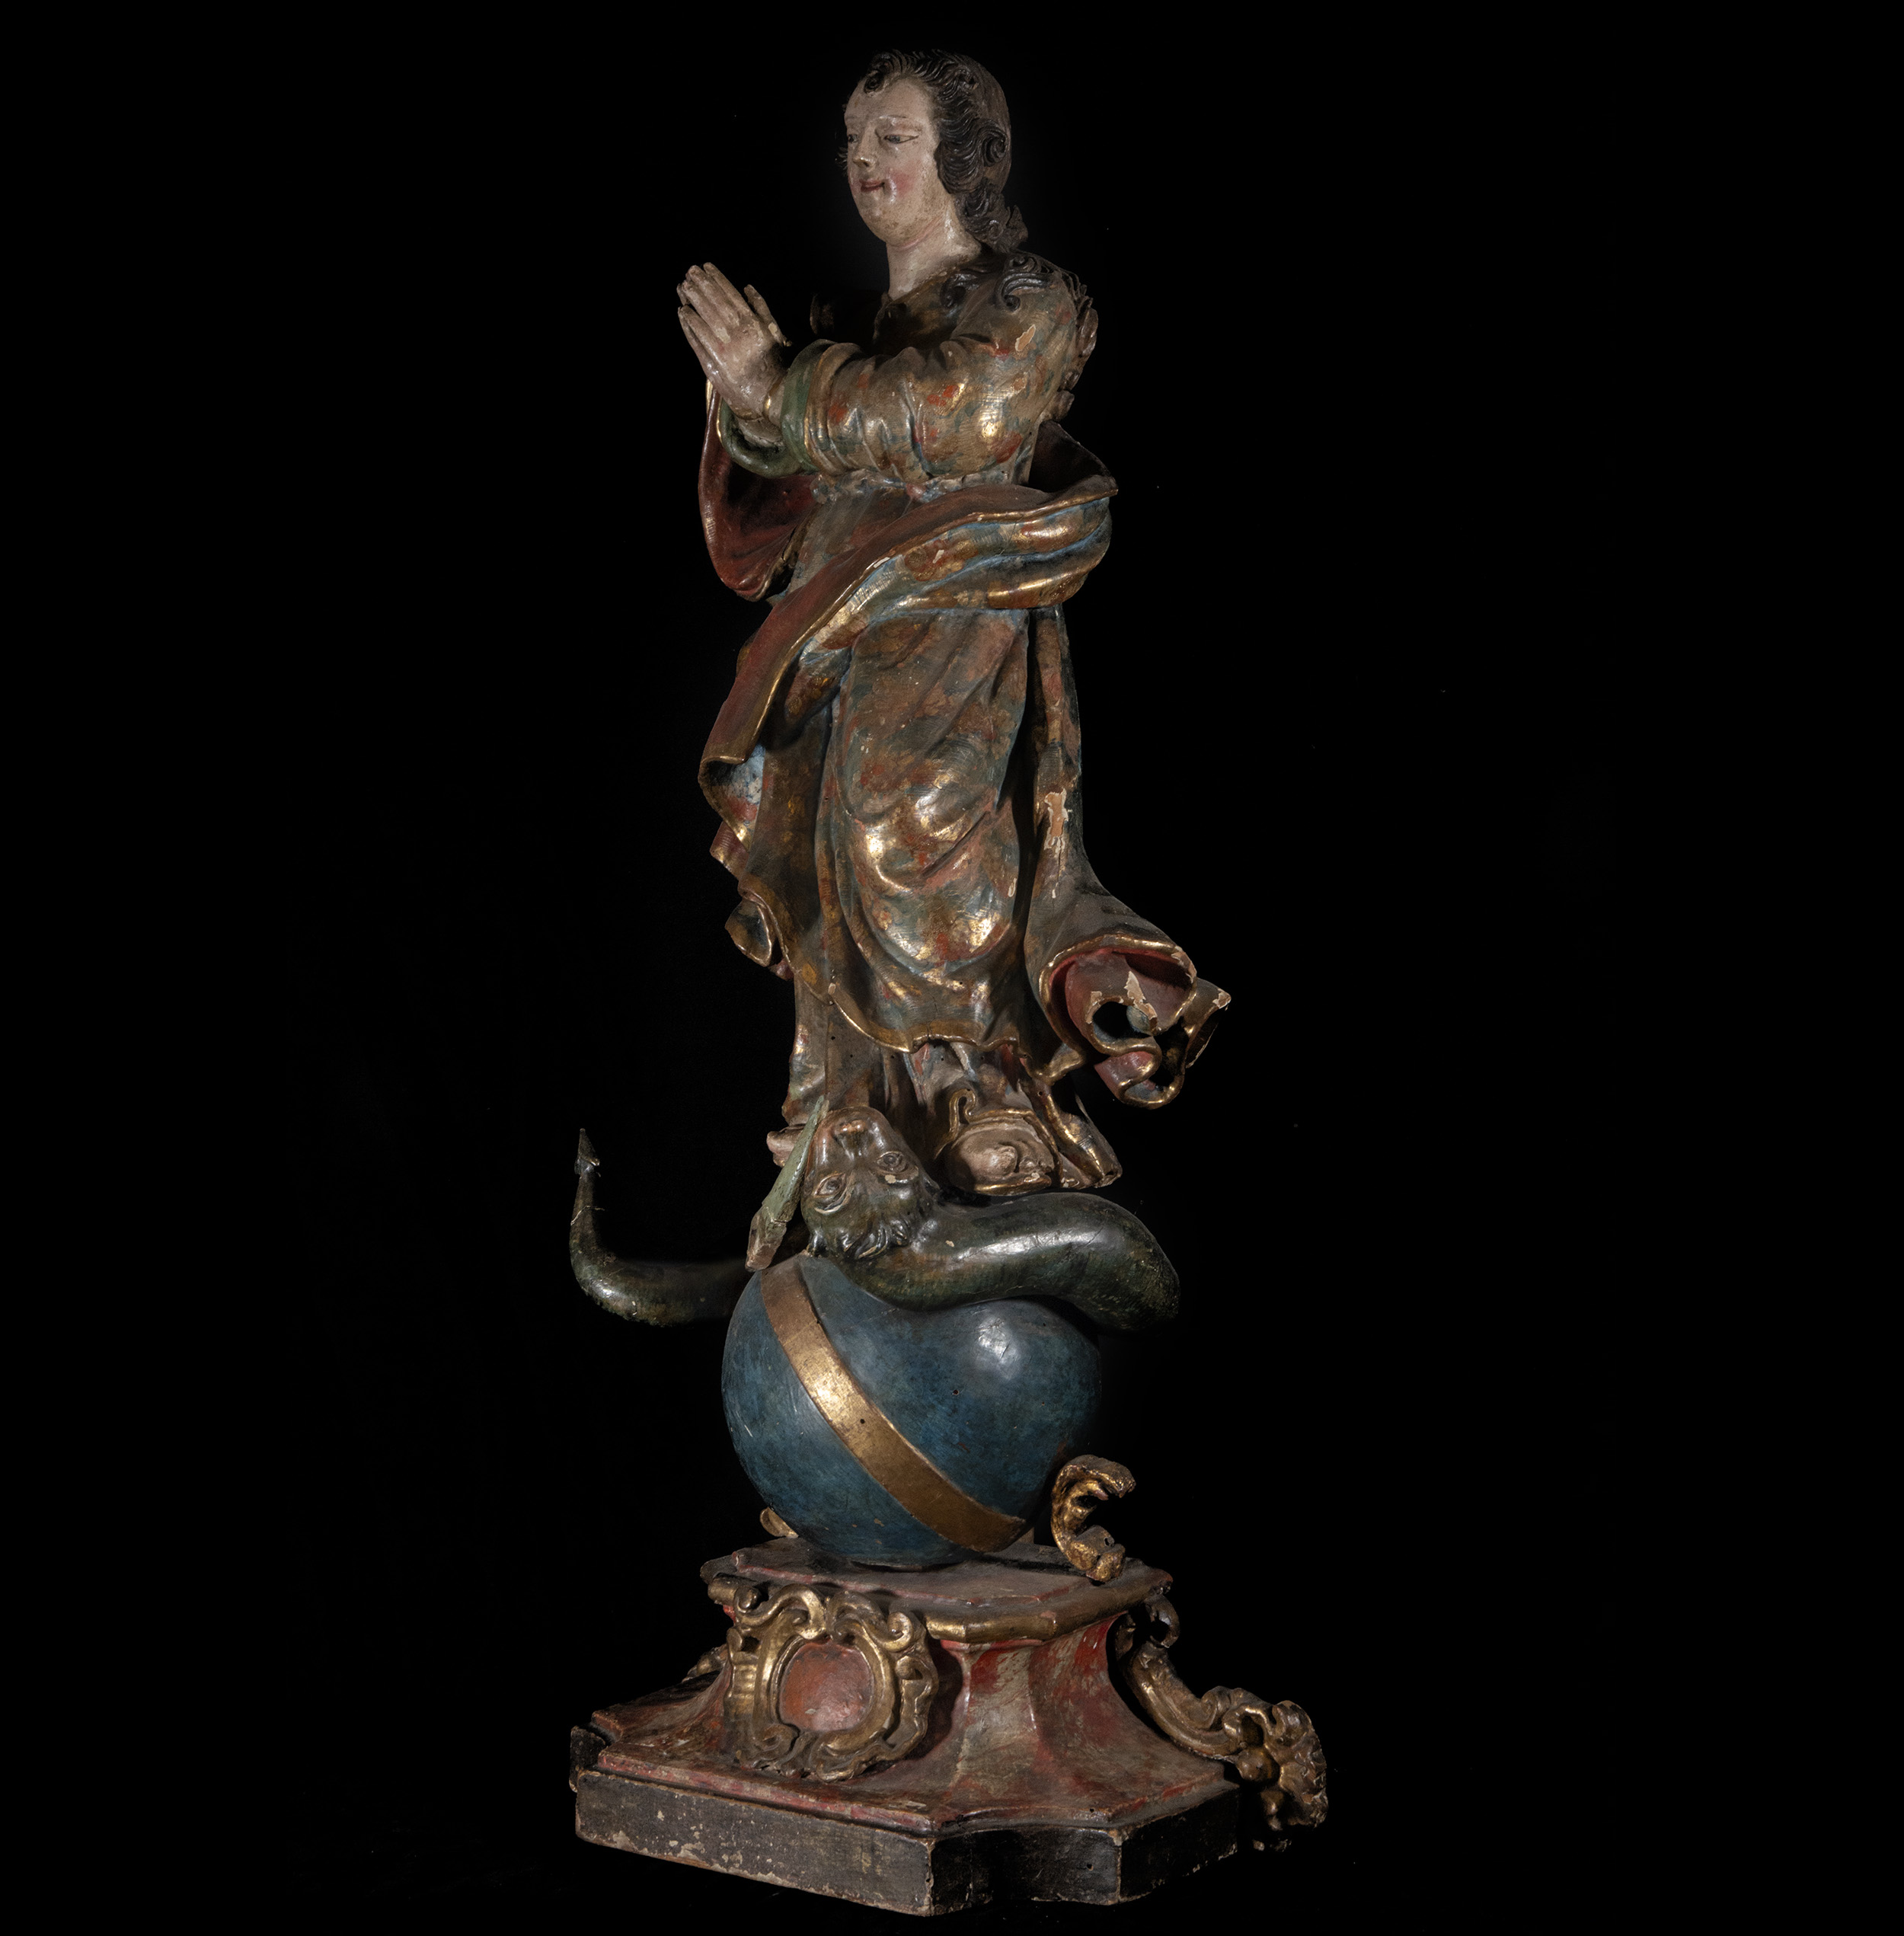 Brazilian colonial school of the 17th century - early 18th century, Mary Immaculate in Glory - Image 6 of 11